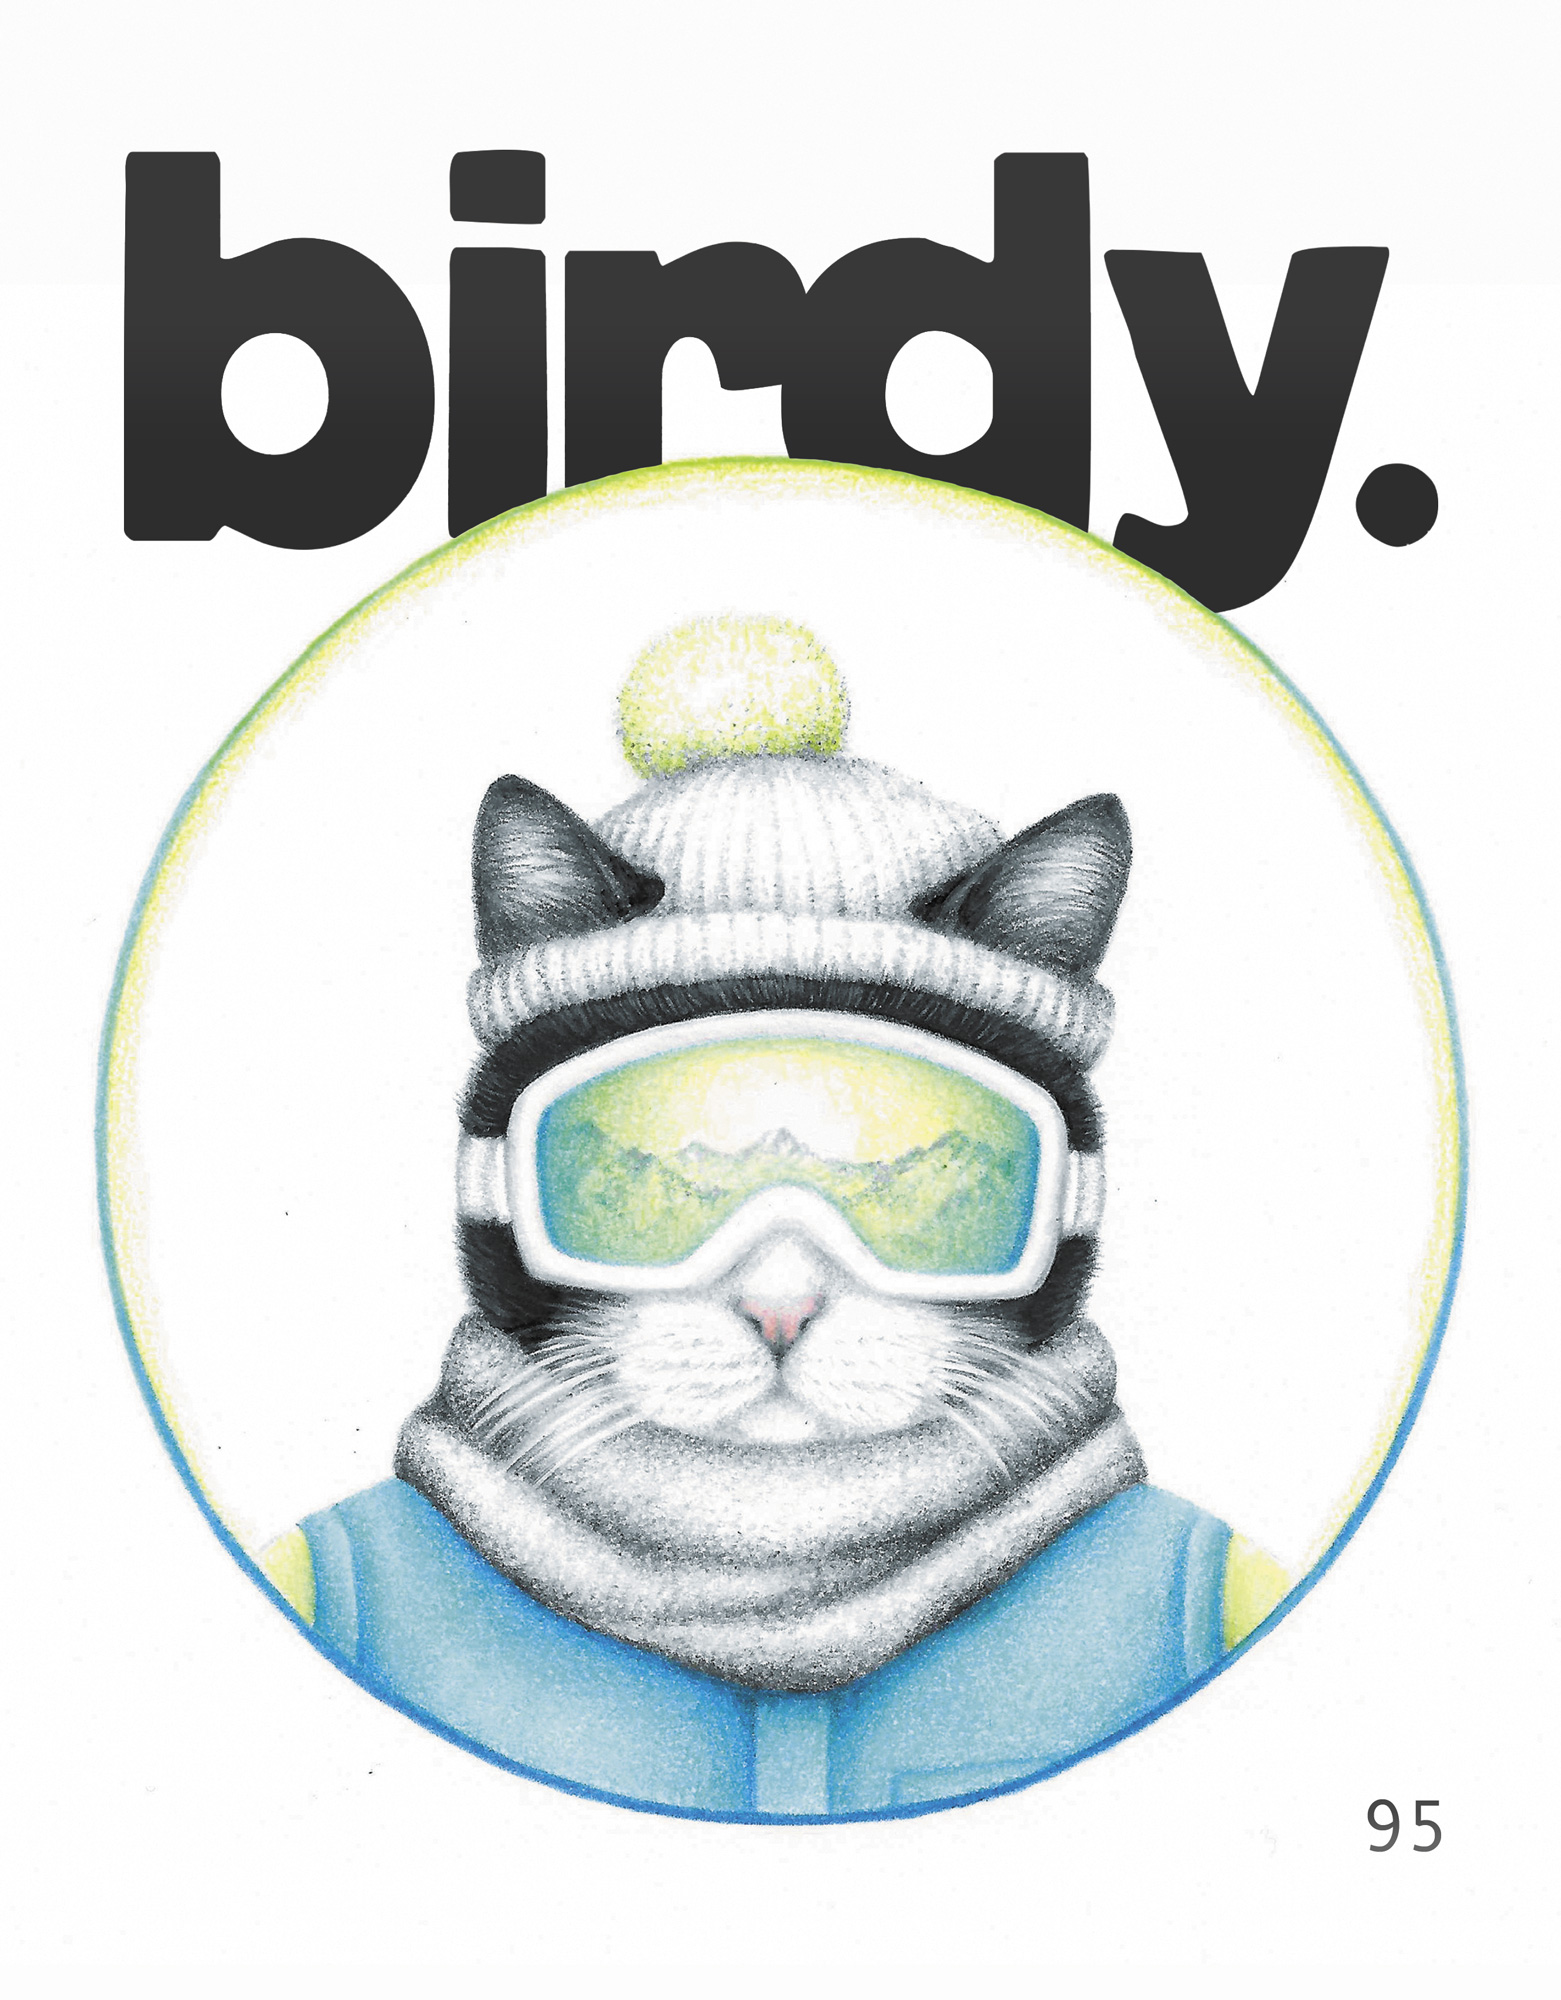 Birdy Cover Issue 095